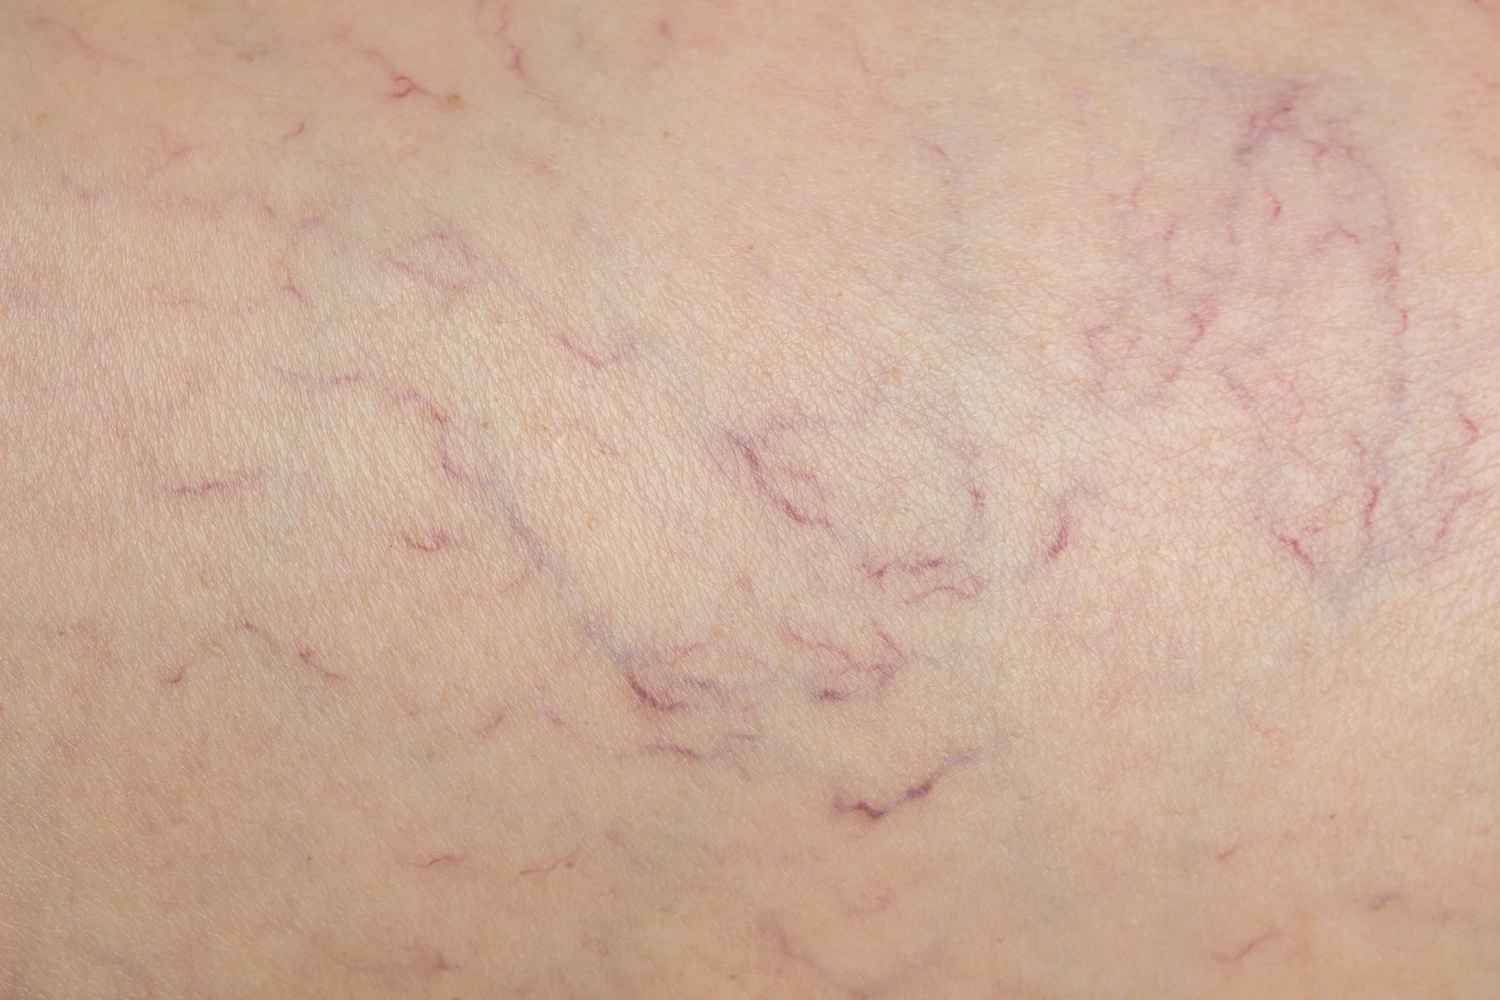 visible veins due to increased blood flow